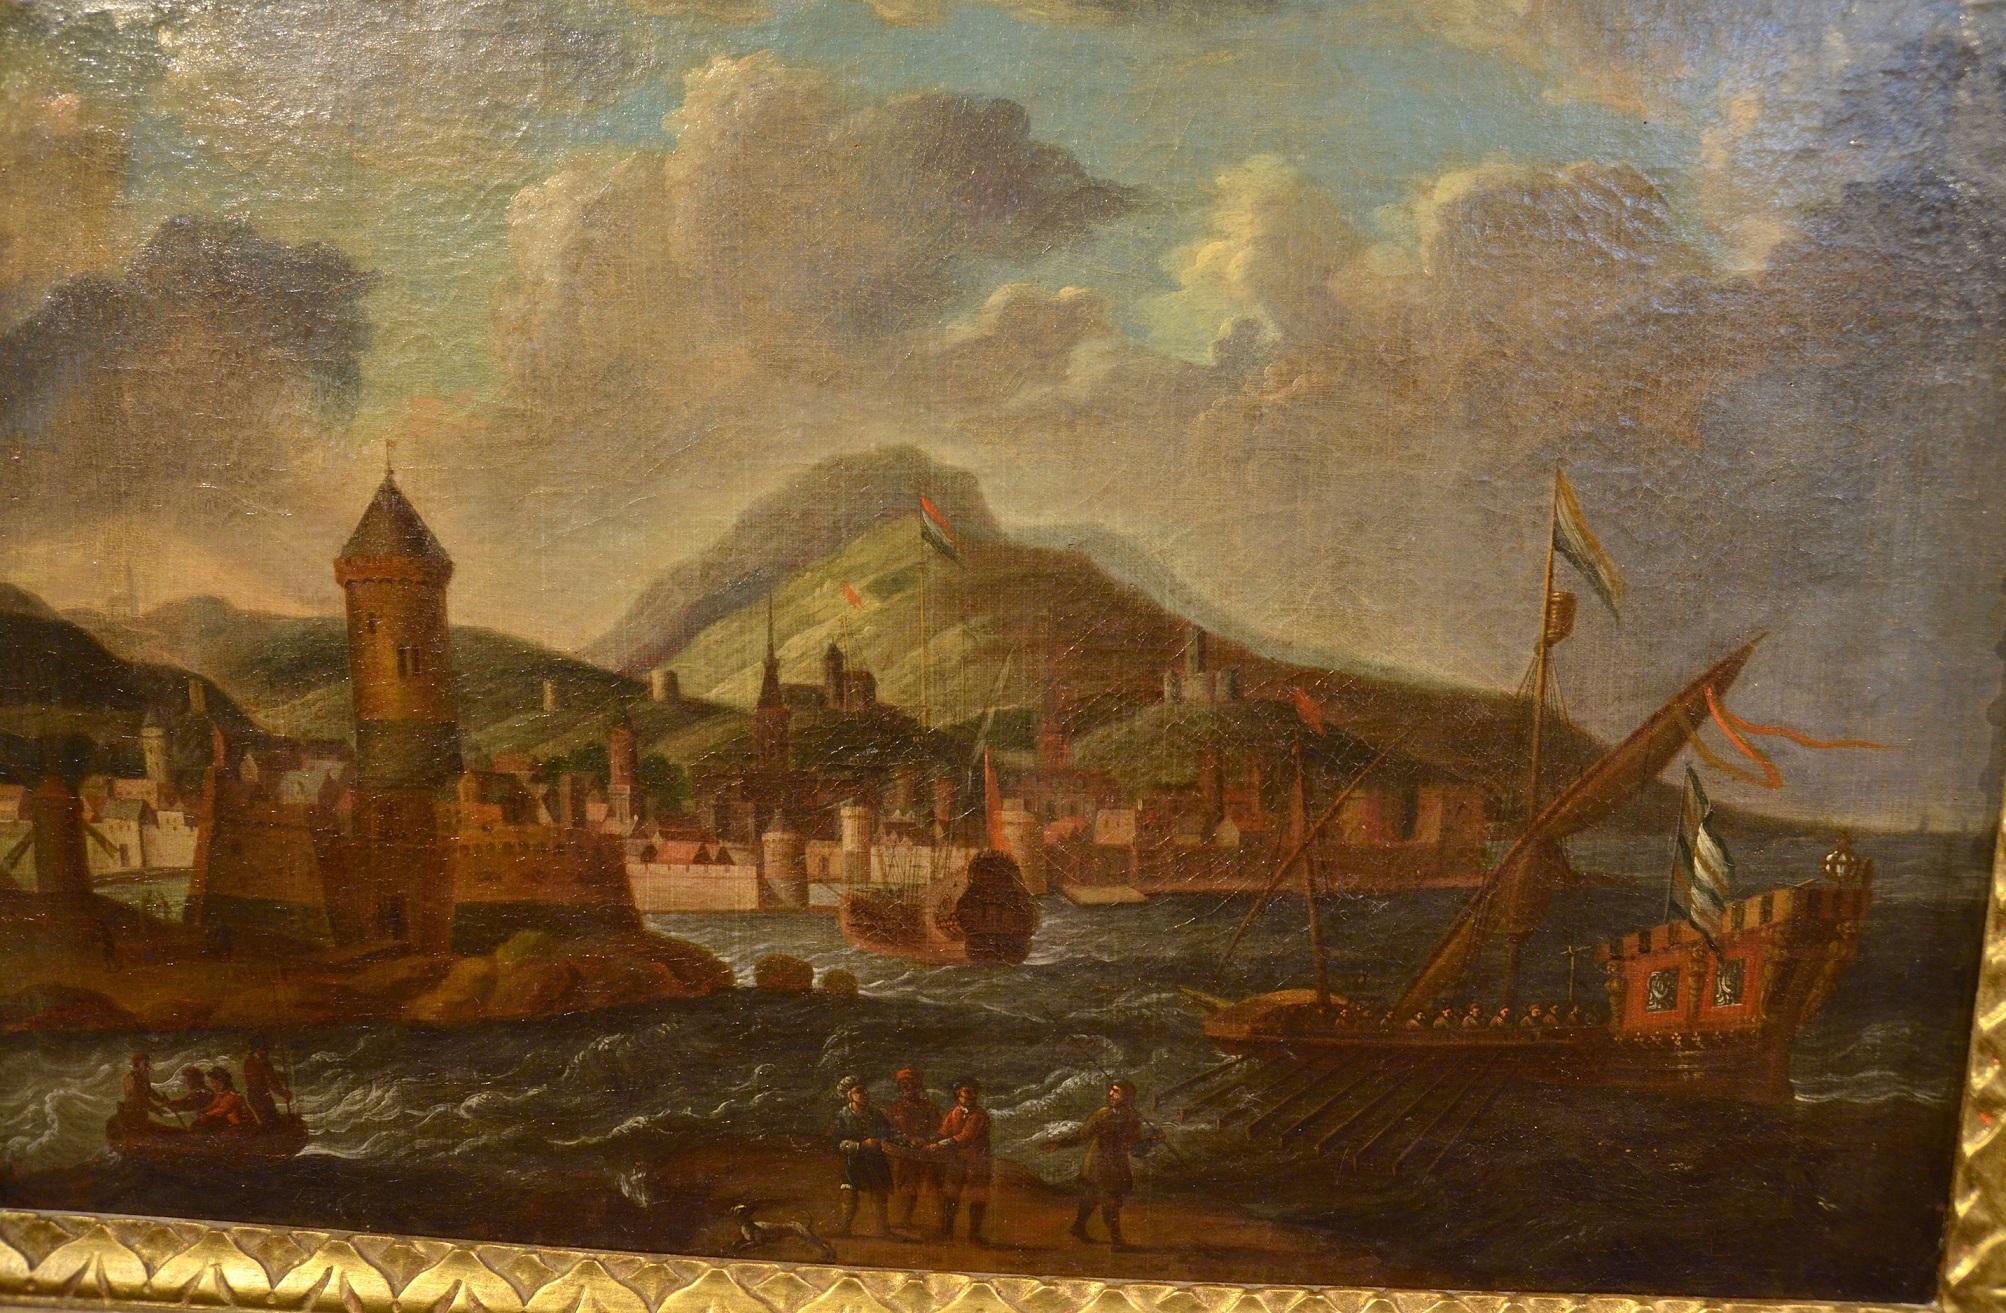 Paint Oil on canvas 17th Century Italy Mediterranean Landscapes Marina Flandre For Sale 10